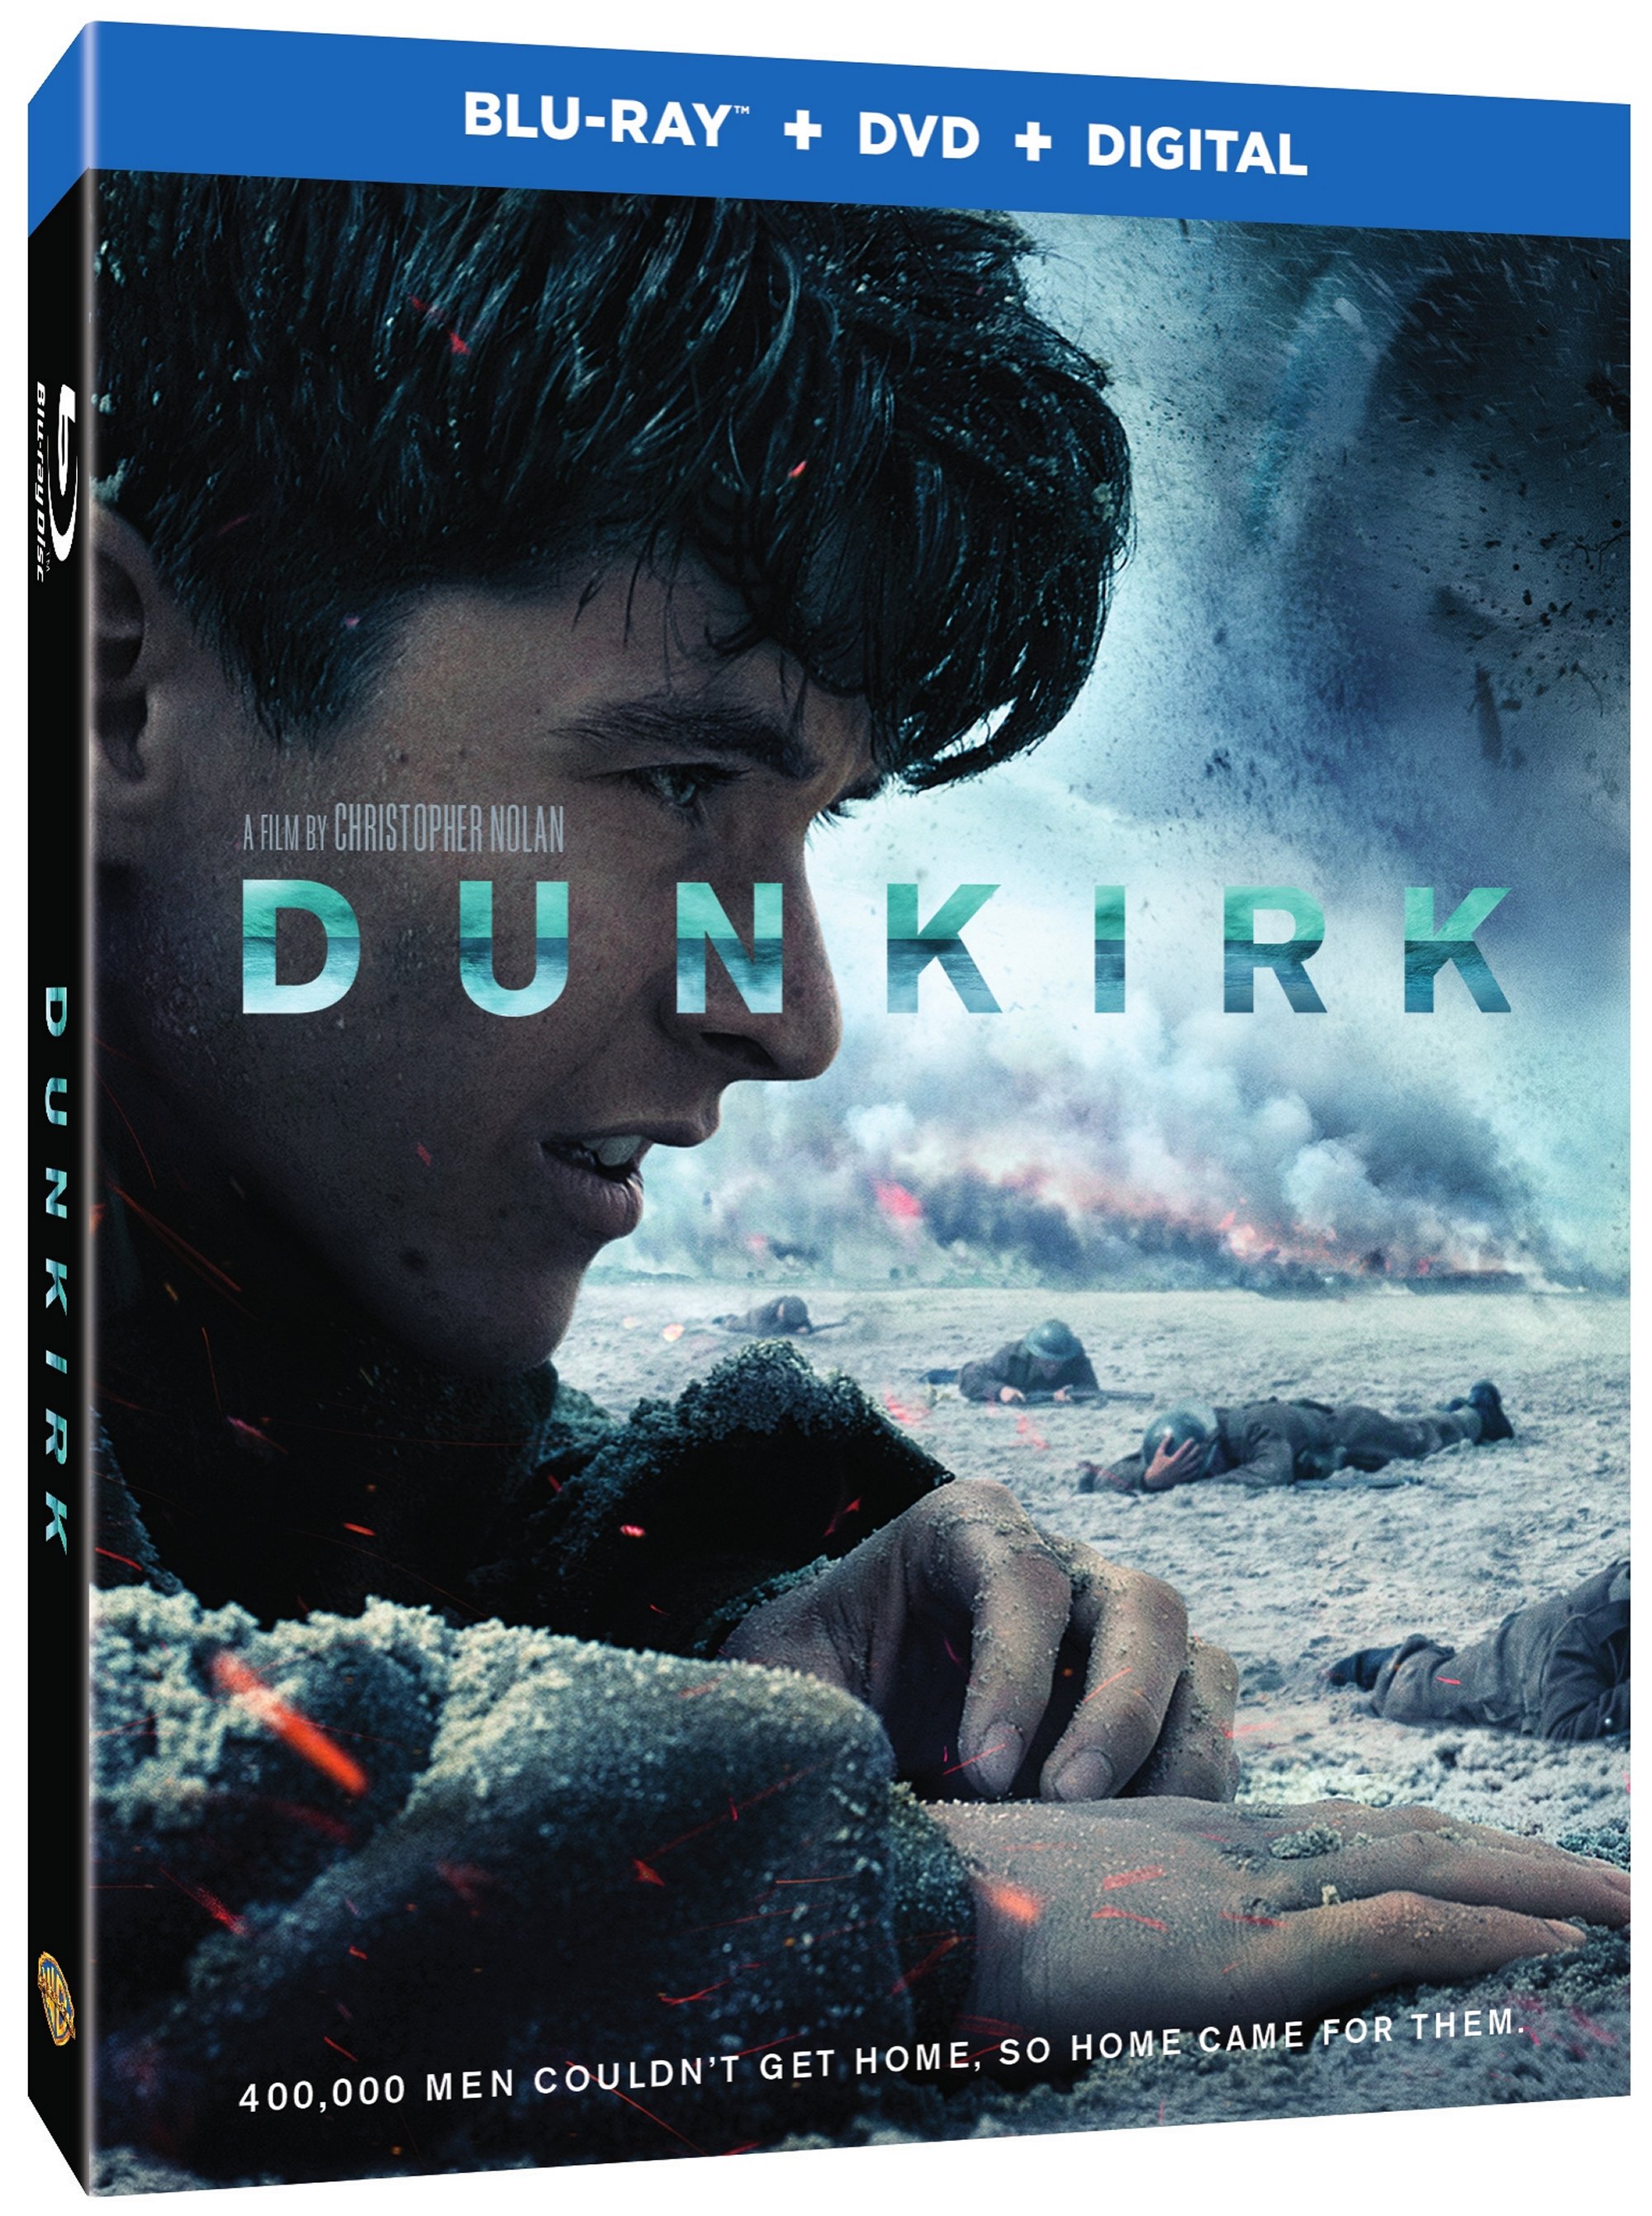 Dunkirk Blu-ray Review